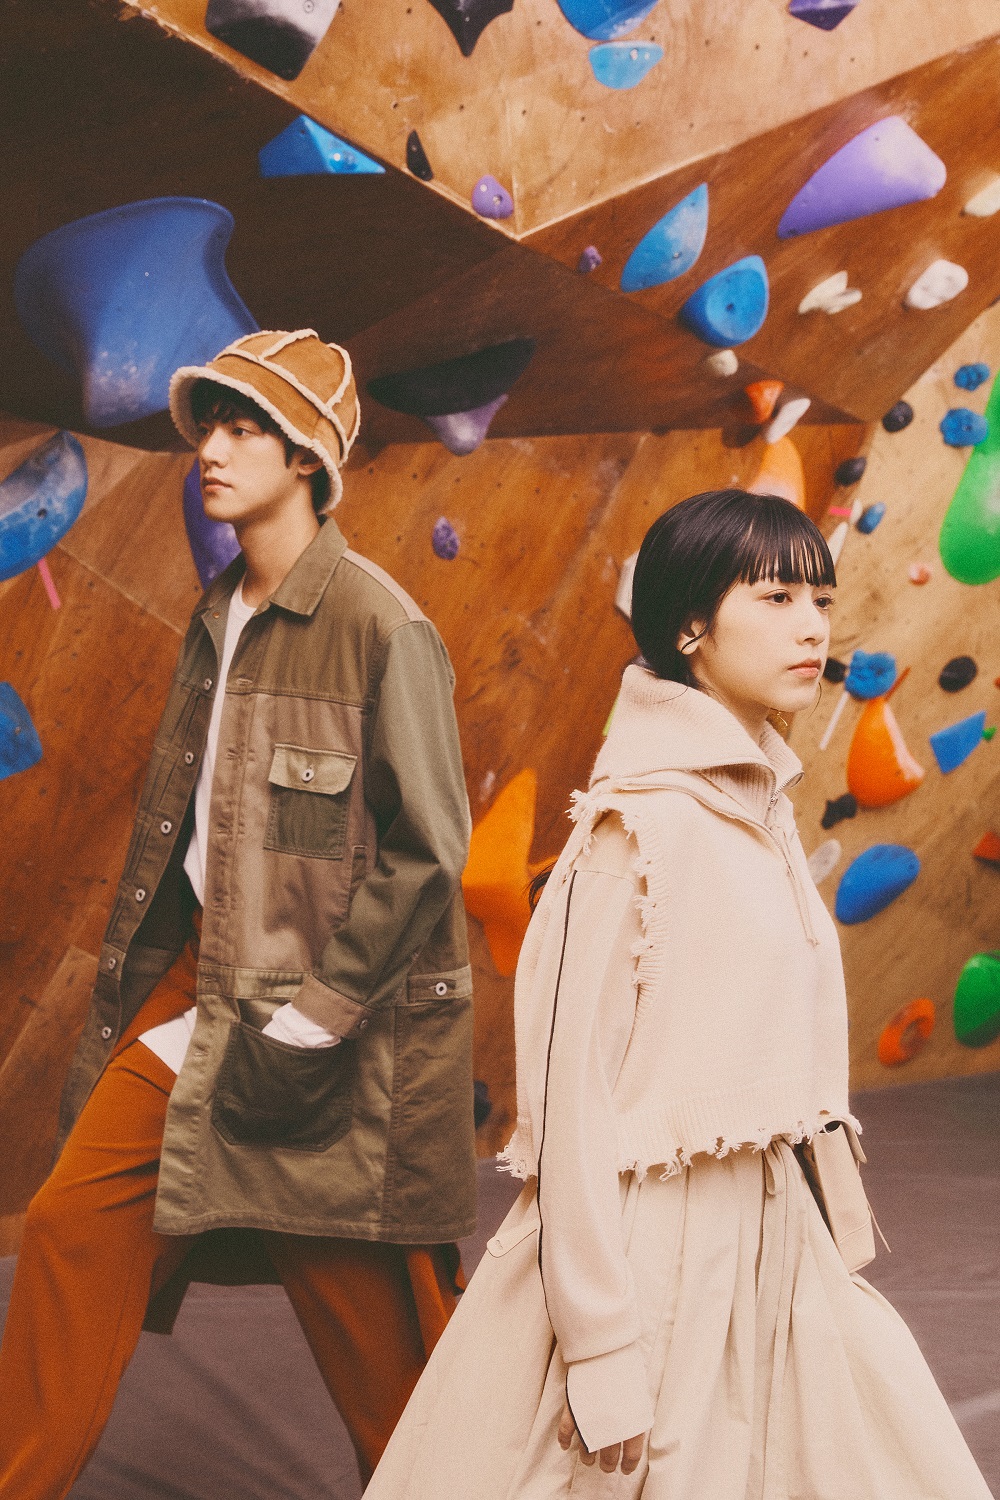 MiTCH Launches 2022 Autumn Collection and Showcases the Beauty of Japanese Clothing